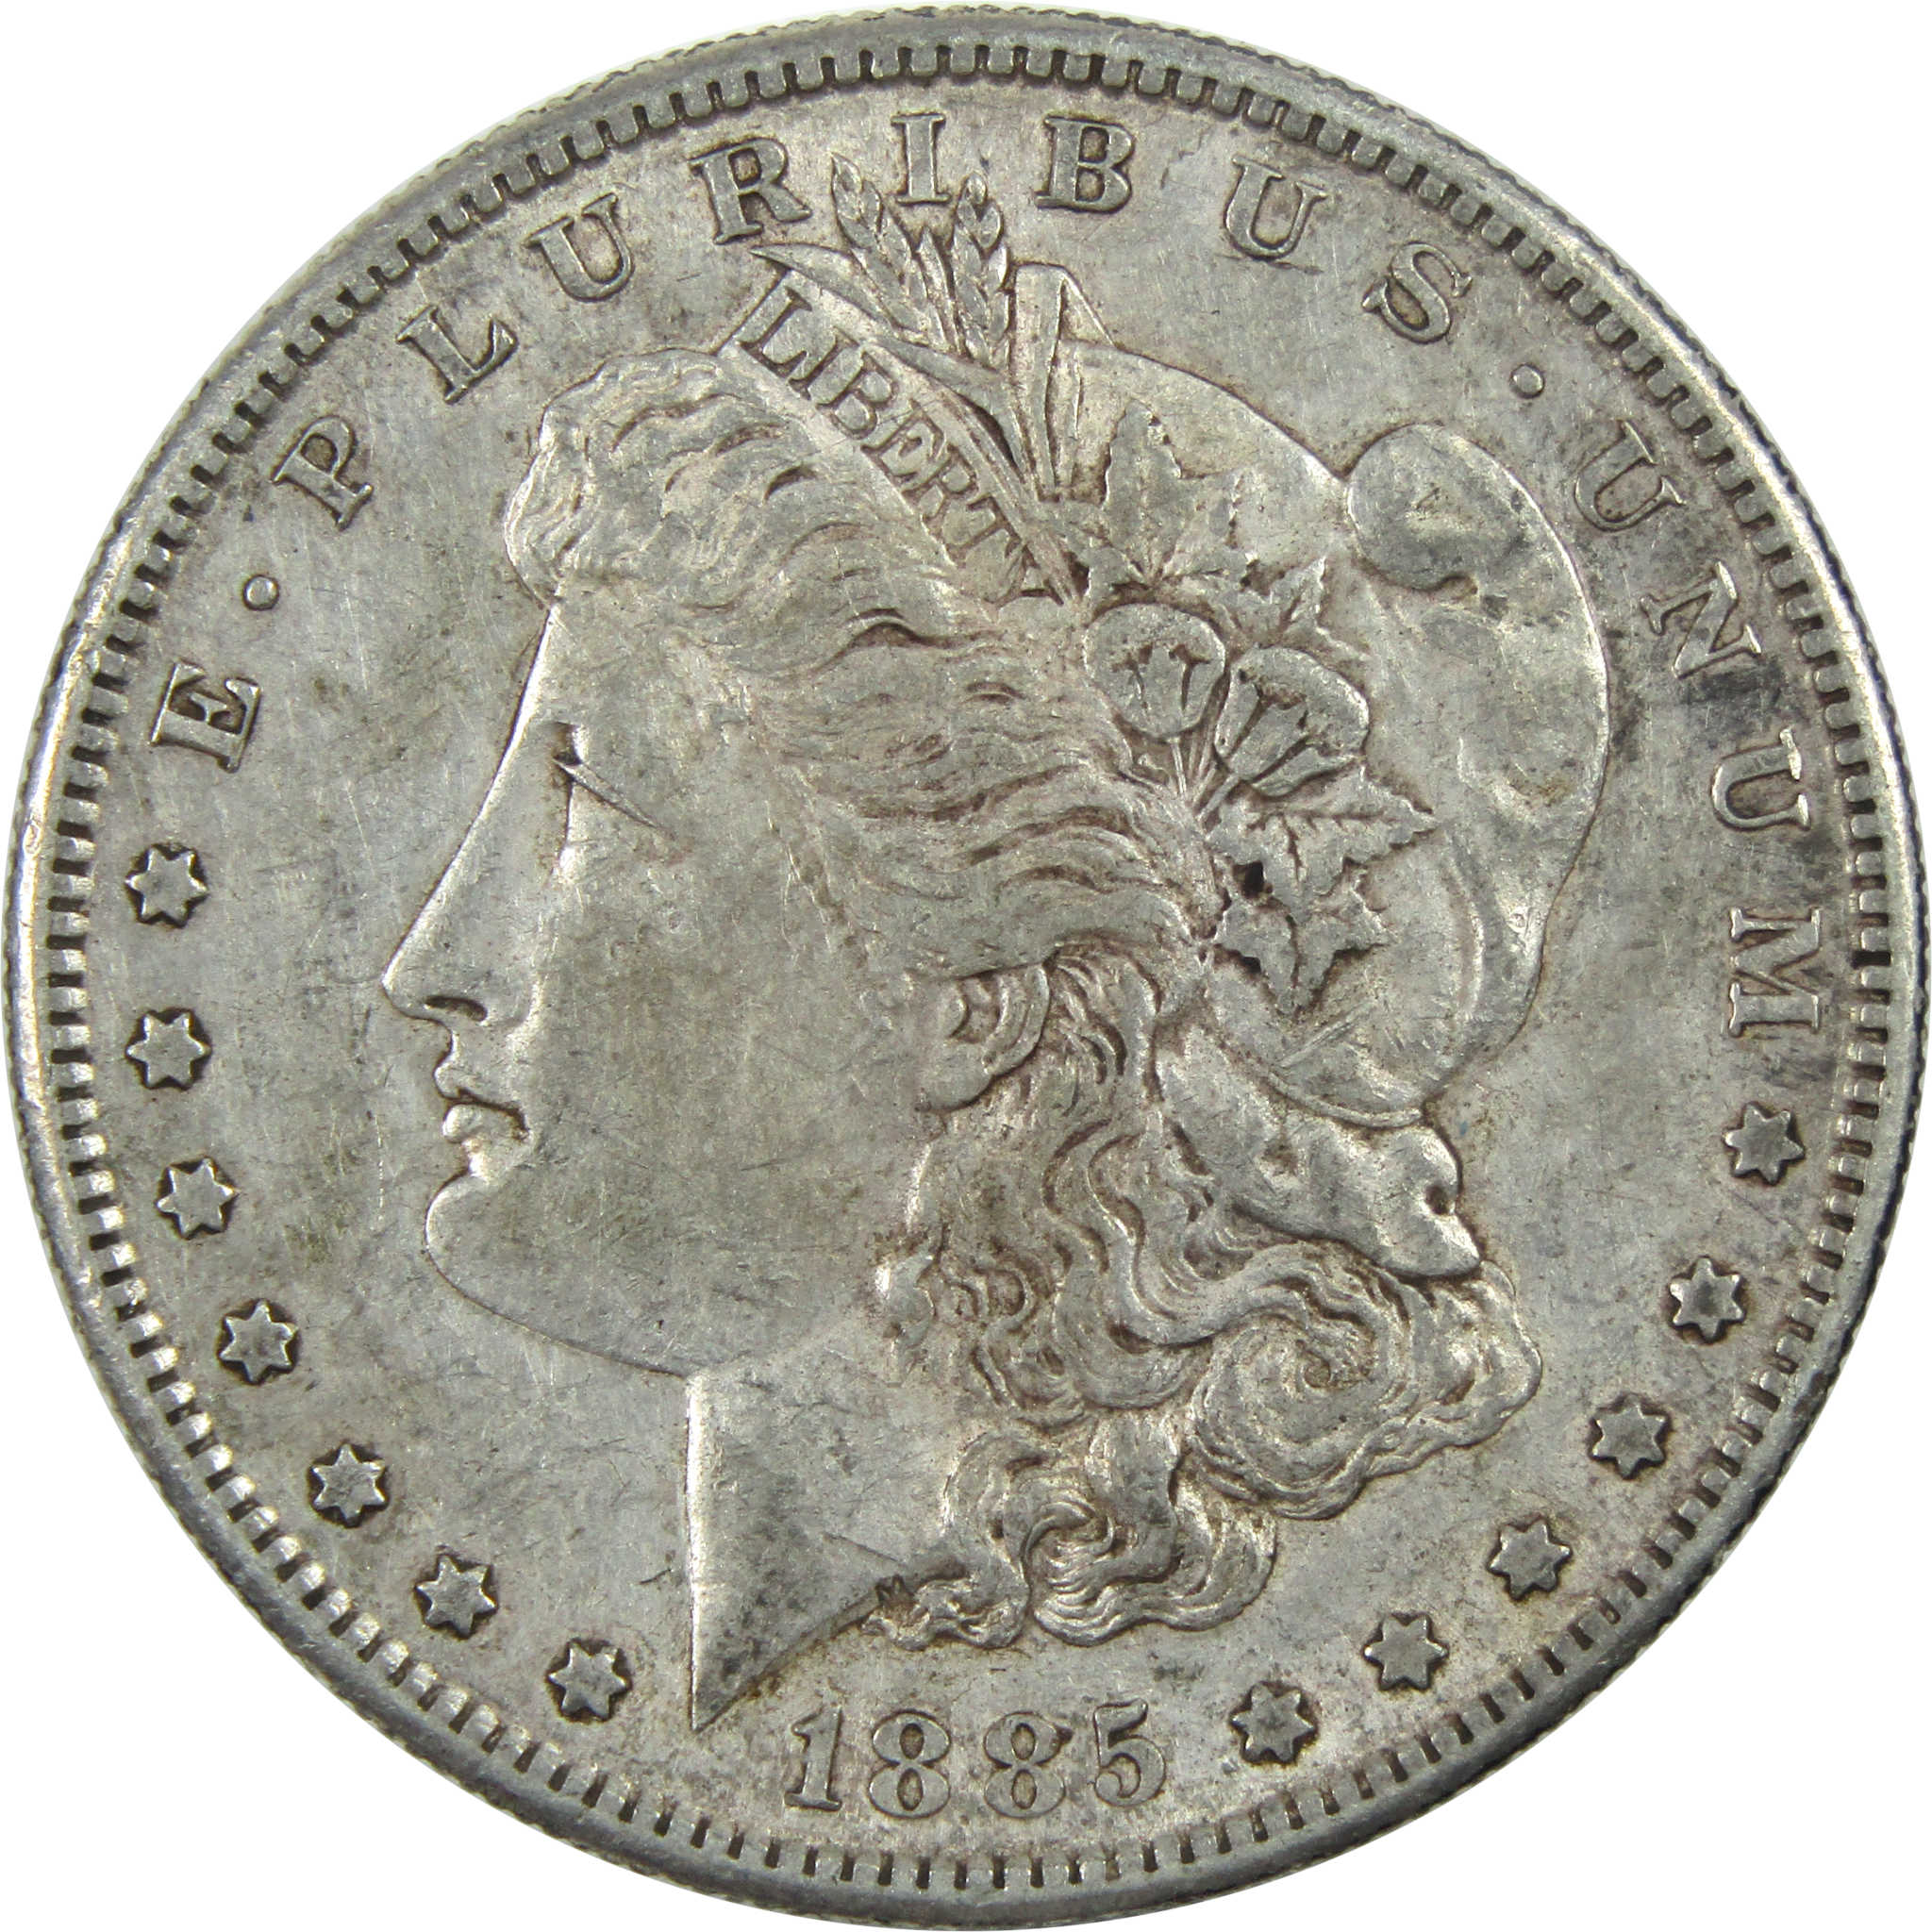 1885 S Morgan Dollar XF EF Extremely Fine Silver $1 Coin SKU:I11672 - Morgan coin - Morgan silver dollar - Morgan silver dollar for sale - Profile Coins &amp; Collectibles